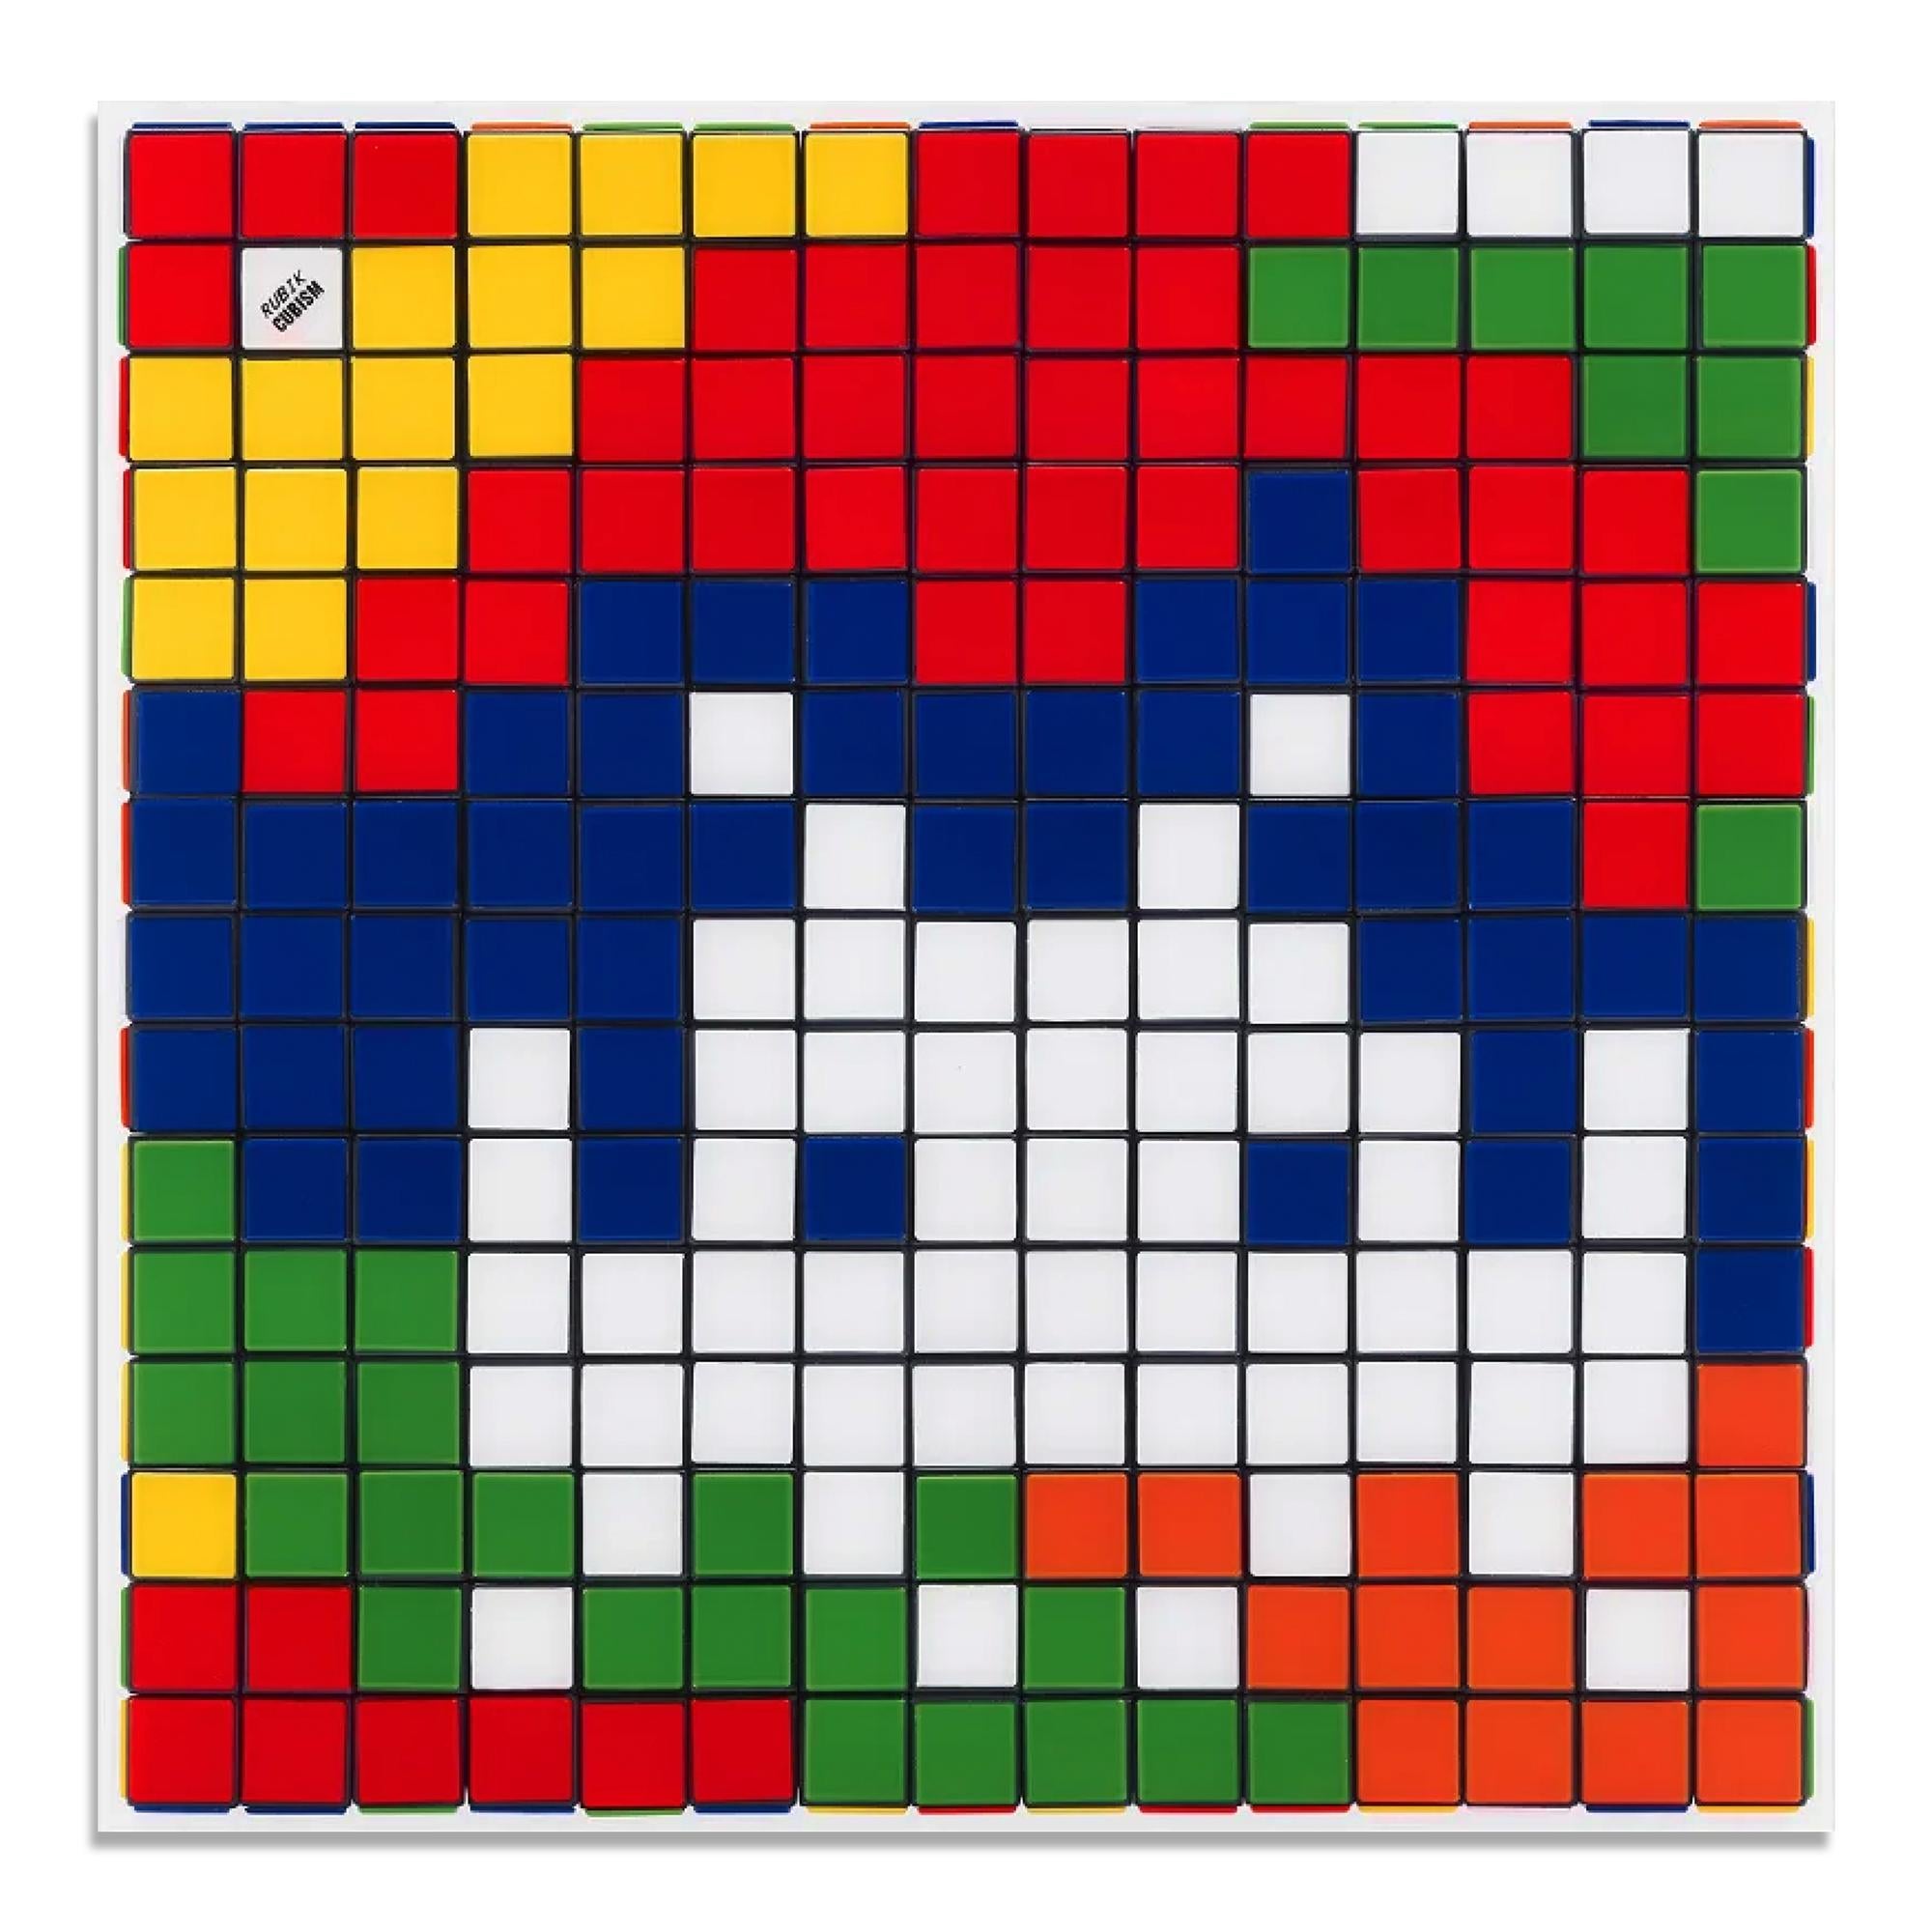 Invader (French, b. 1969)
Rubik Camouflage (NVDR1-2), 2023
Medium: Giclée print on aluminum composite panel with Diasec mounting
Dimensions: 100 x 100 cm (39 2/5 × 39 2/5 in)
Edition of 812: Hand-signed and numbered on label affixed to